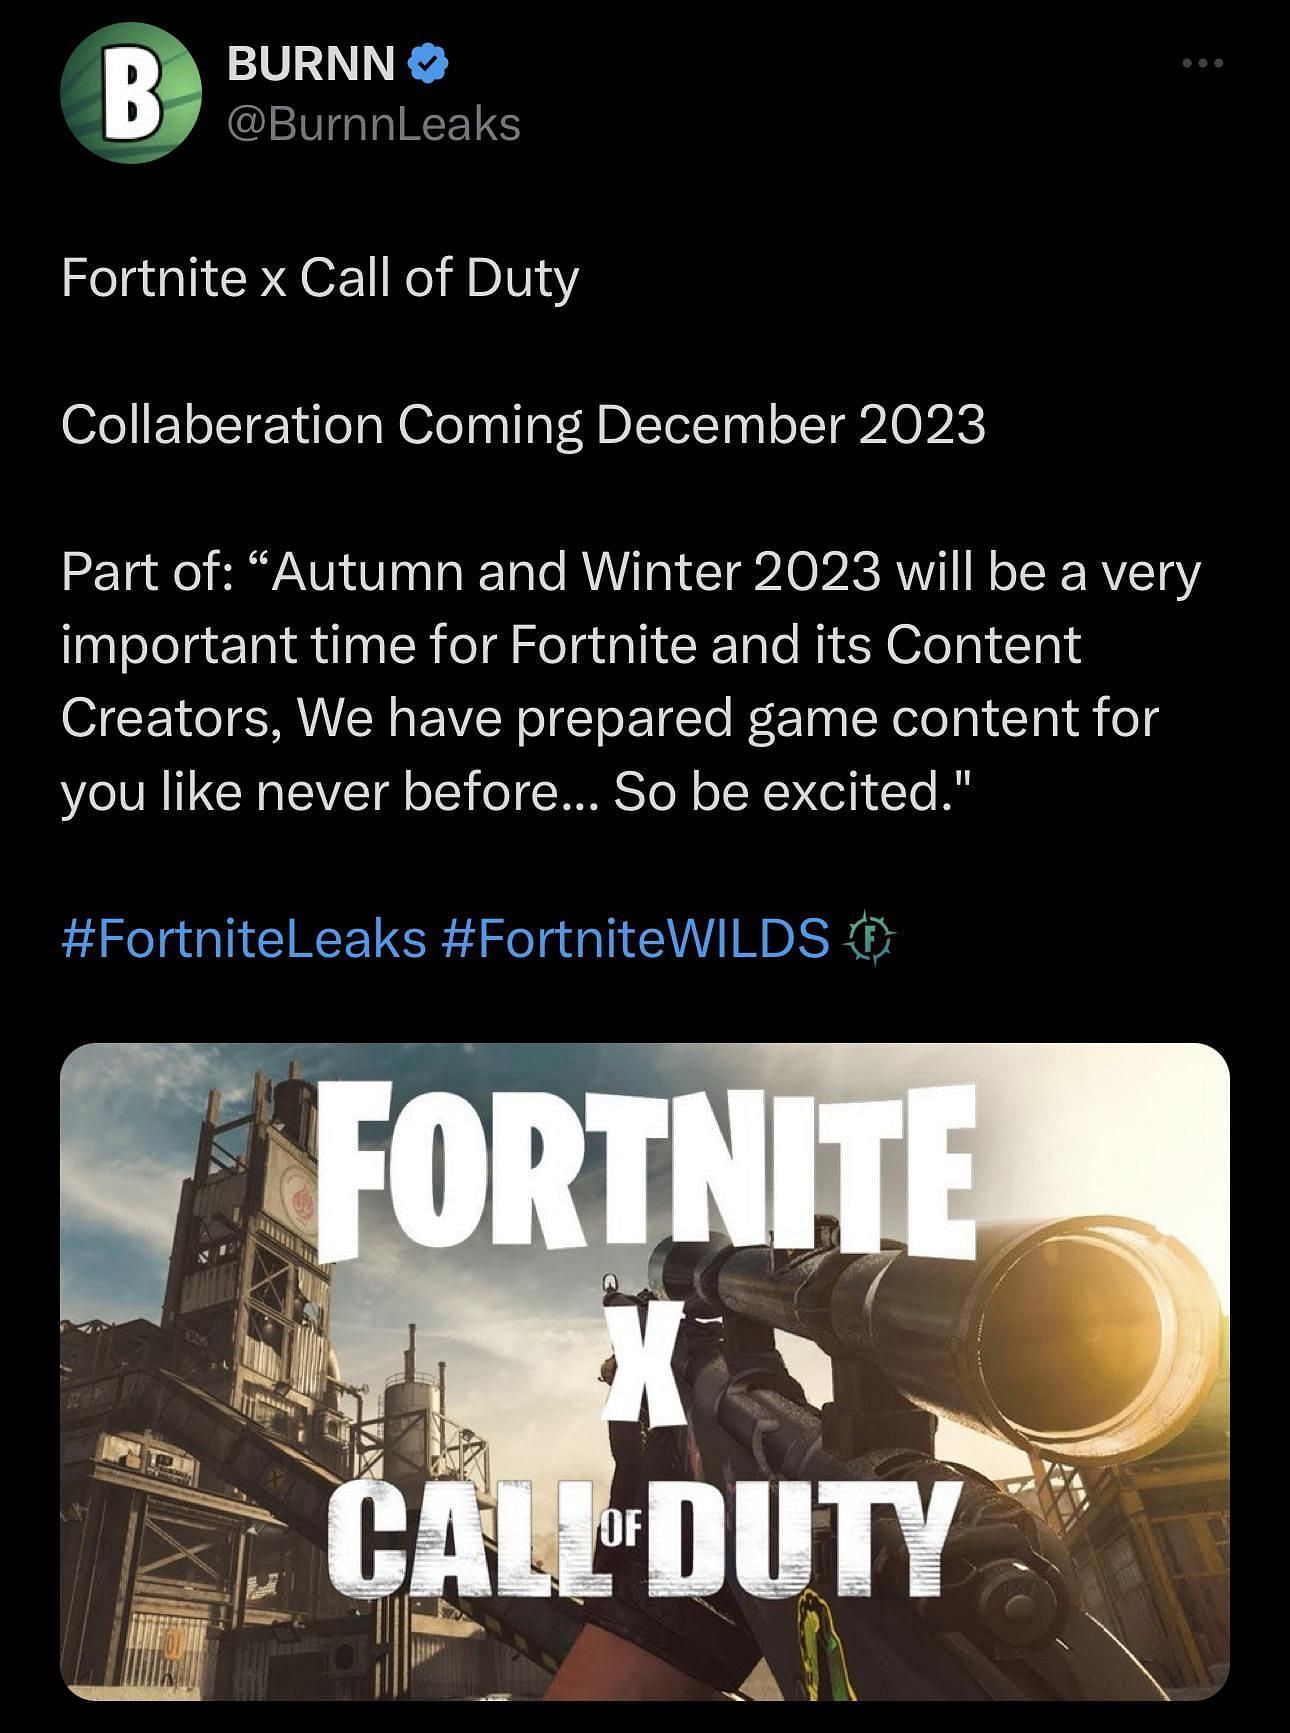 Rumors of a Fortnite x Call of Duty collaboration are on the rise (Image via Twitter/BurnnLeaks)